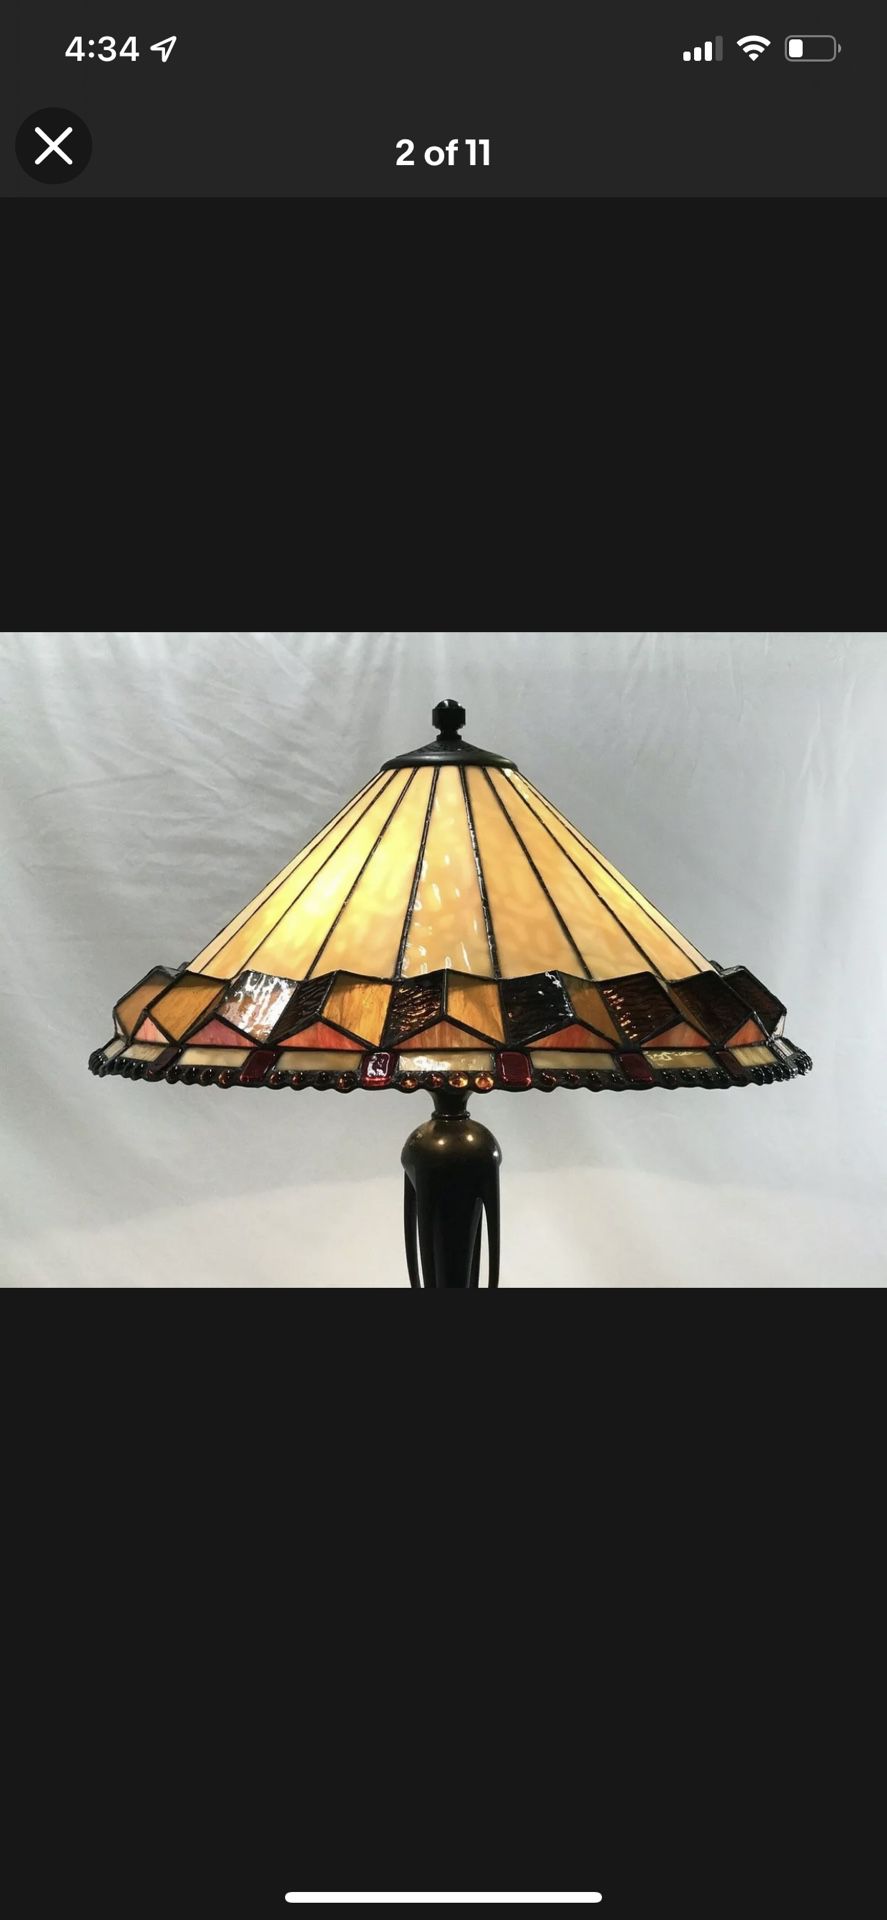 Vtg Stained Glass Lamp Shade Arts & Crafts Mission Tiffany Style 20" Large, Slag